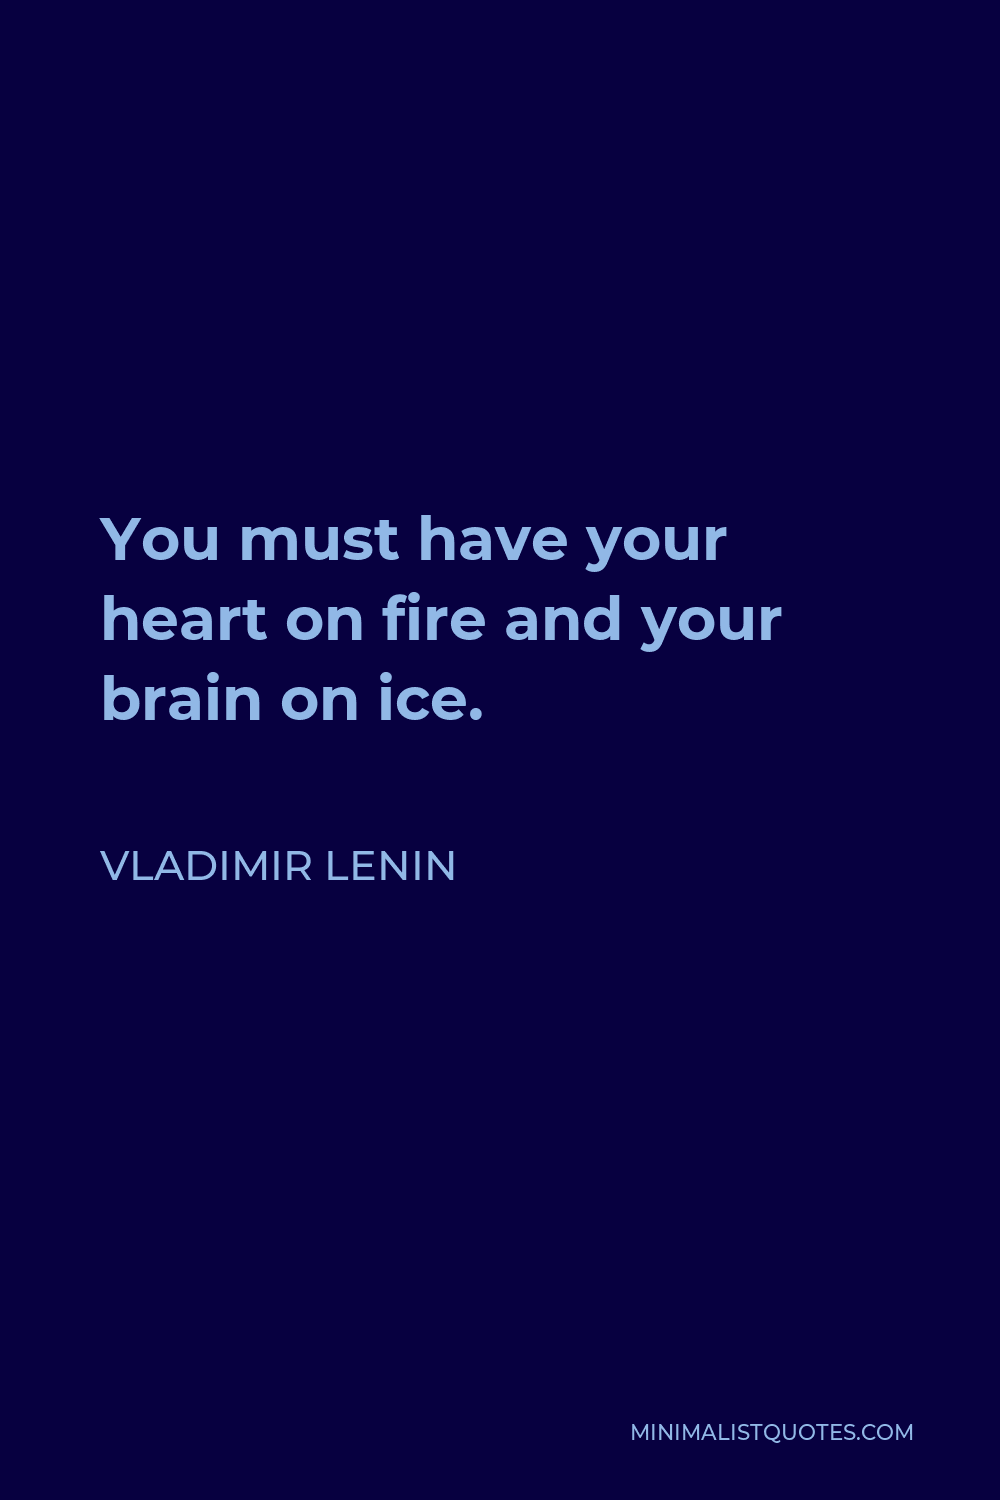 Vladimir Lenin Quote - You must have your heart on fire and your brain on ice.